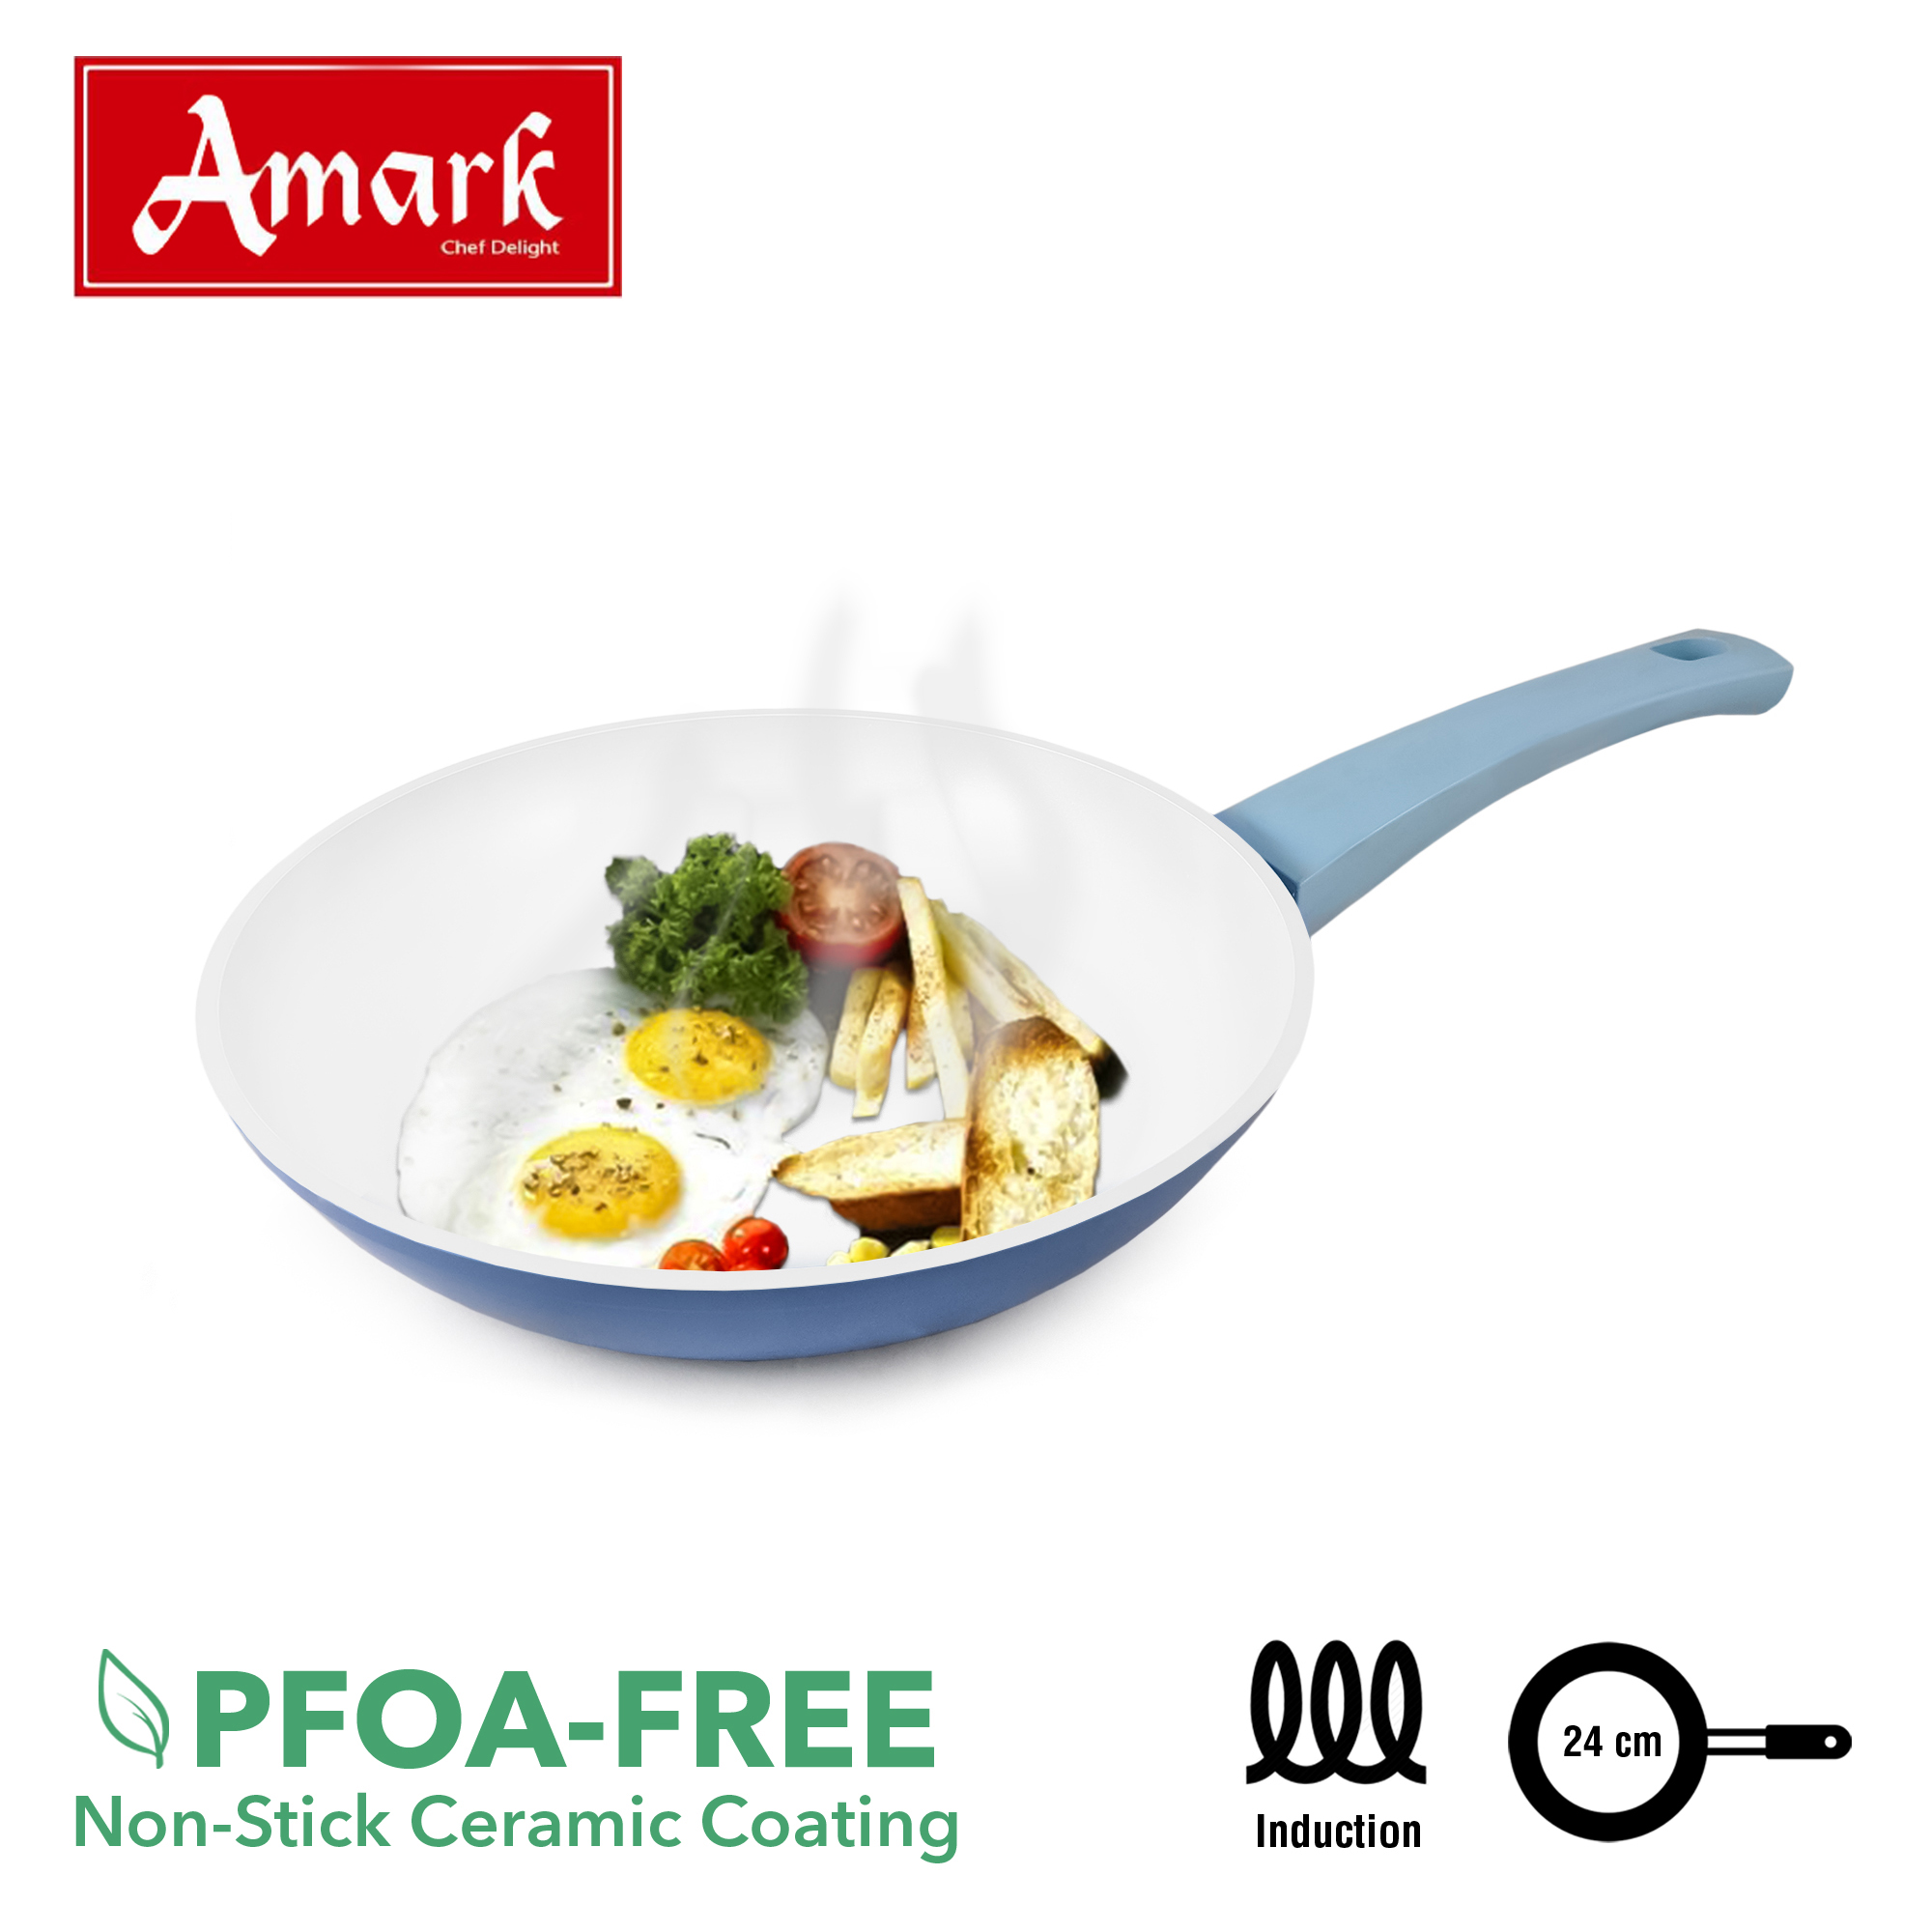 Amark Chef Delight Thermo-Wall Ceramic Induction Frying Pan 24cm